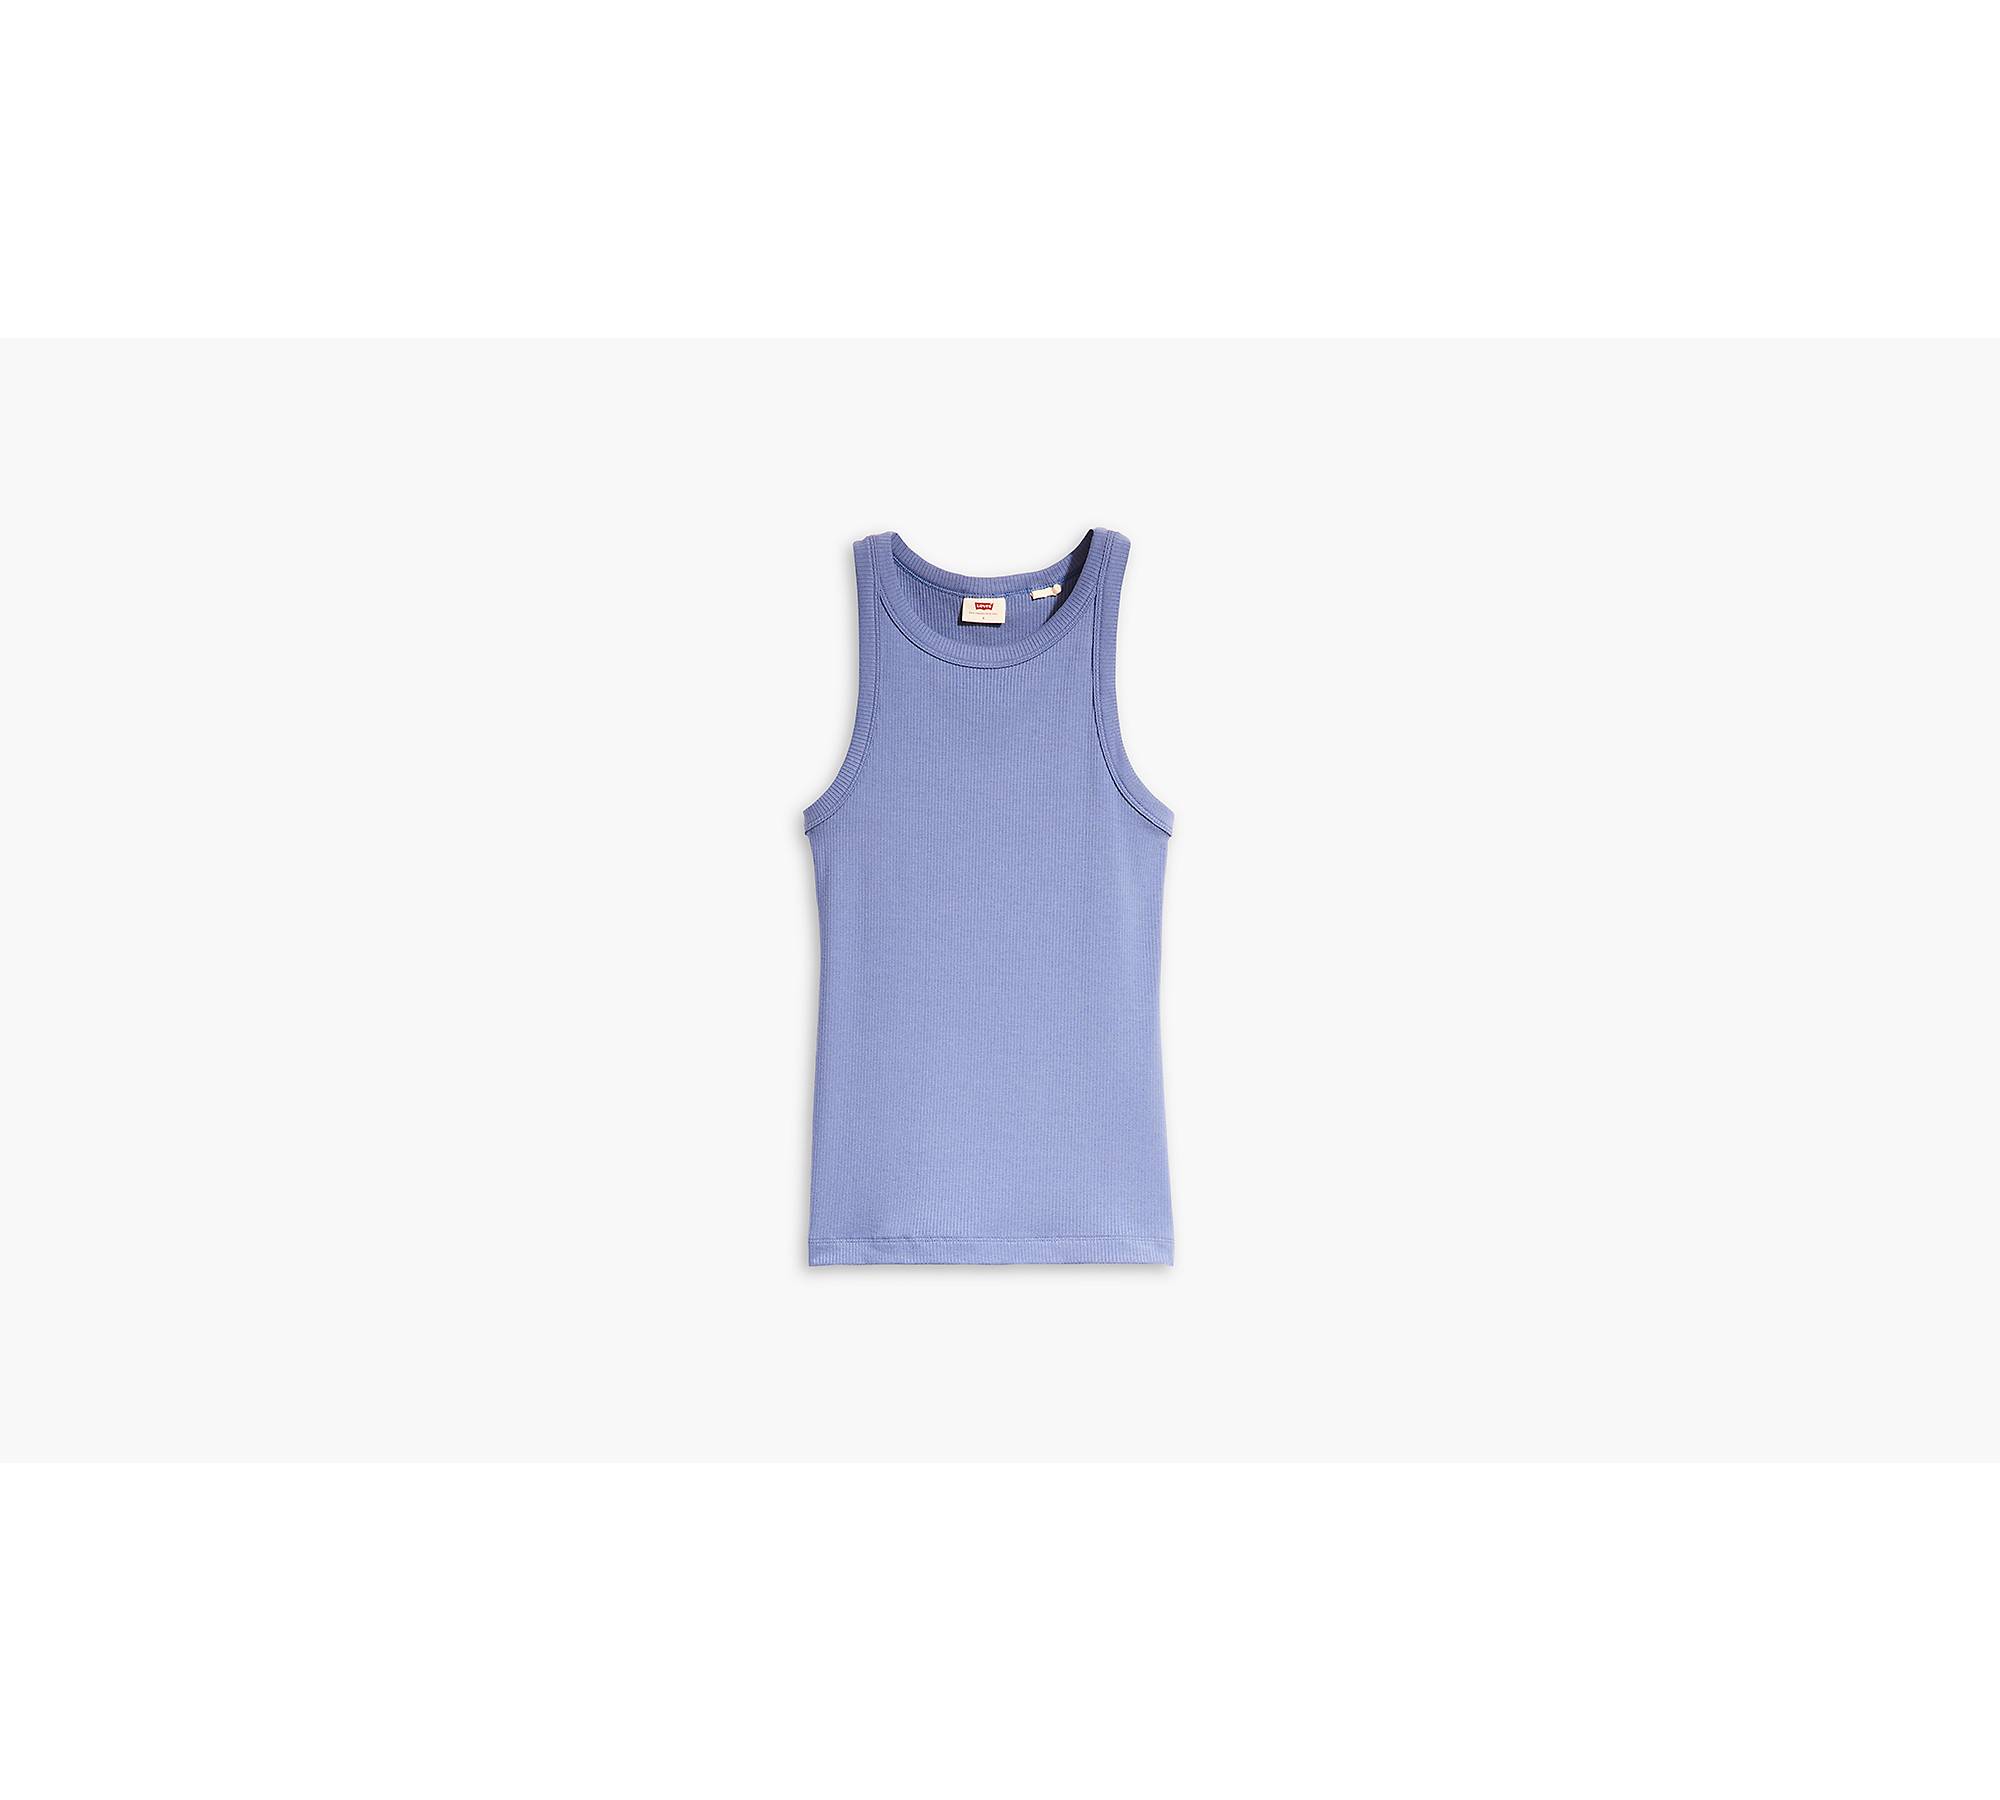 Soft Surroundings Timely Blue Chambray Flowy Sleeveless Tank Top